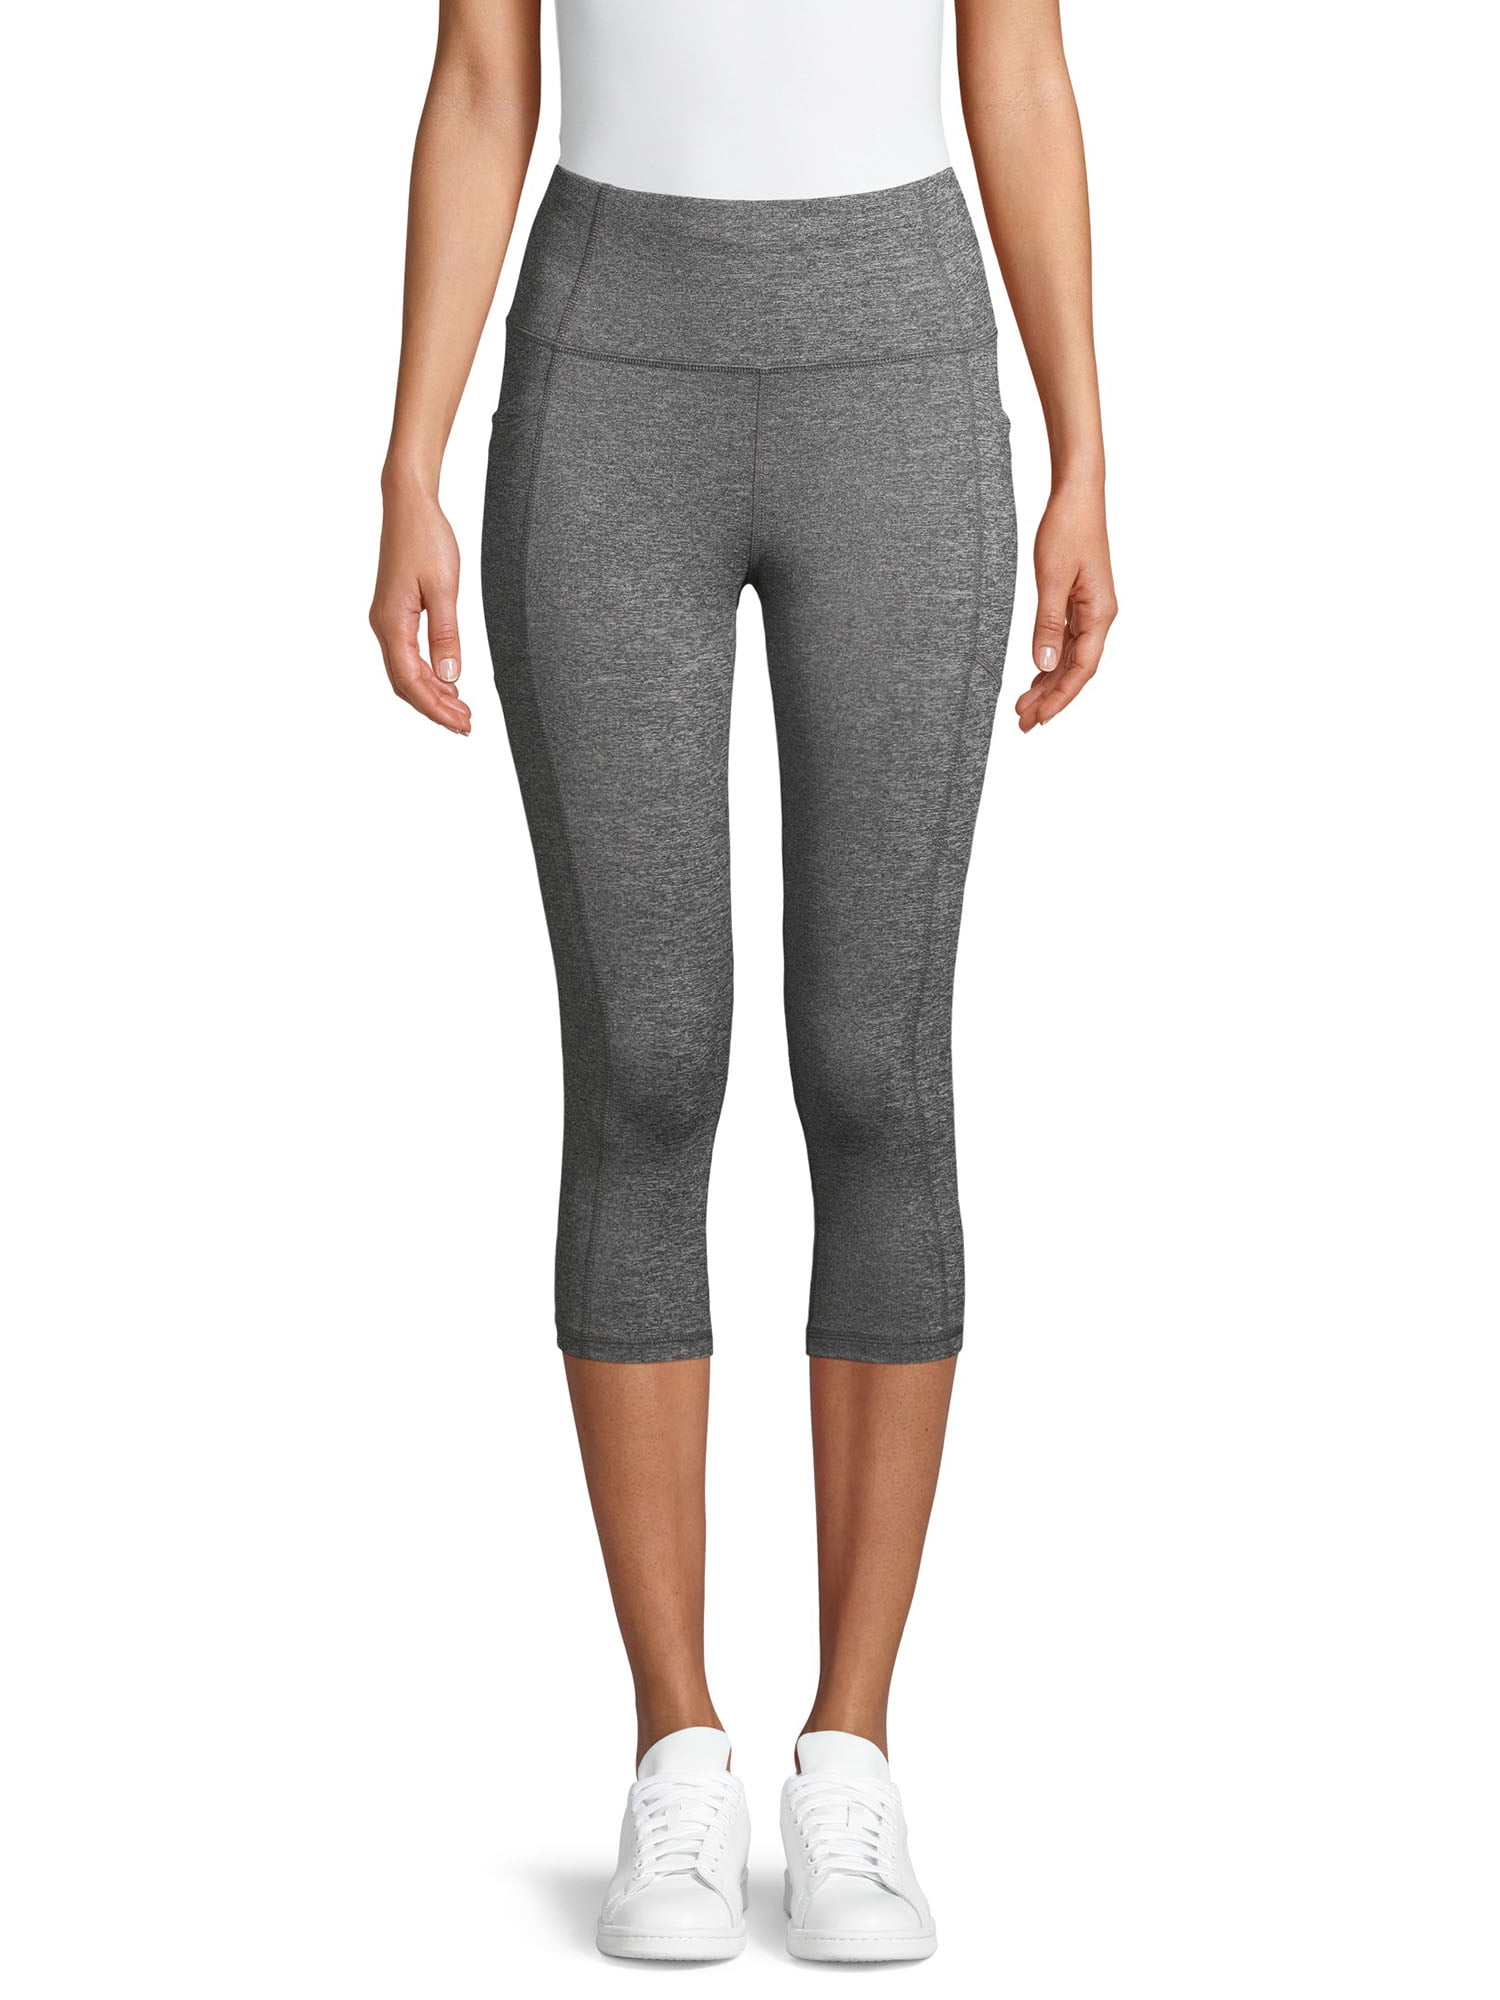 -Ñ8 Women's Dri More Core Relaxed Fit Yoga Pant AVIA SIZE S OR M OR L